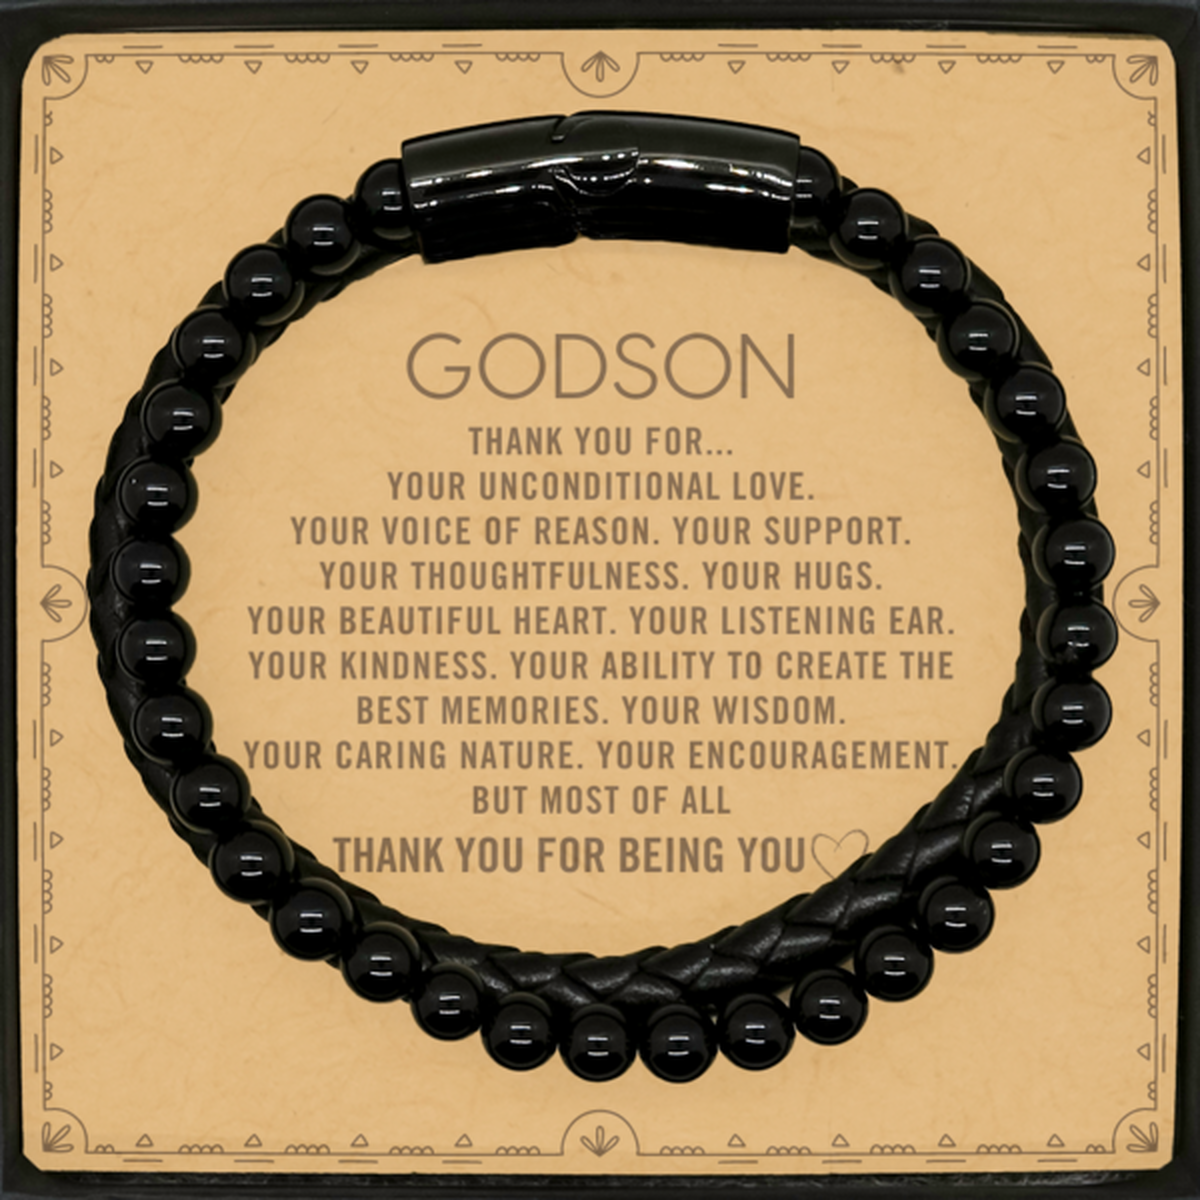 Godson Stone Leather Bracelets Custom, Message Card Gifts For Godson Christmas Graduation Birthday Gifts for Men Women Godson Thank you for Your unconditional love